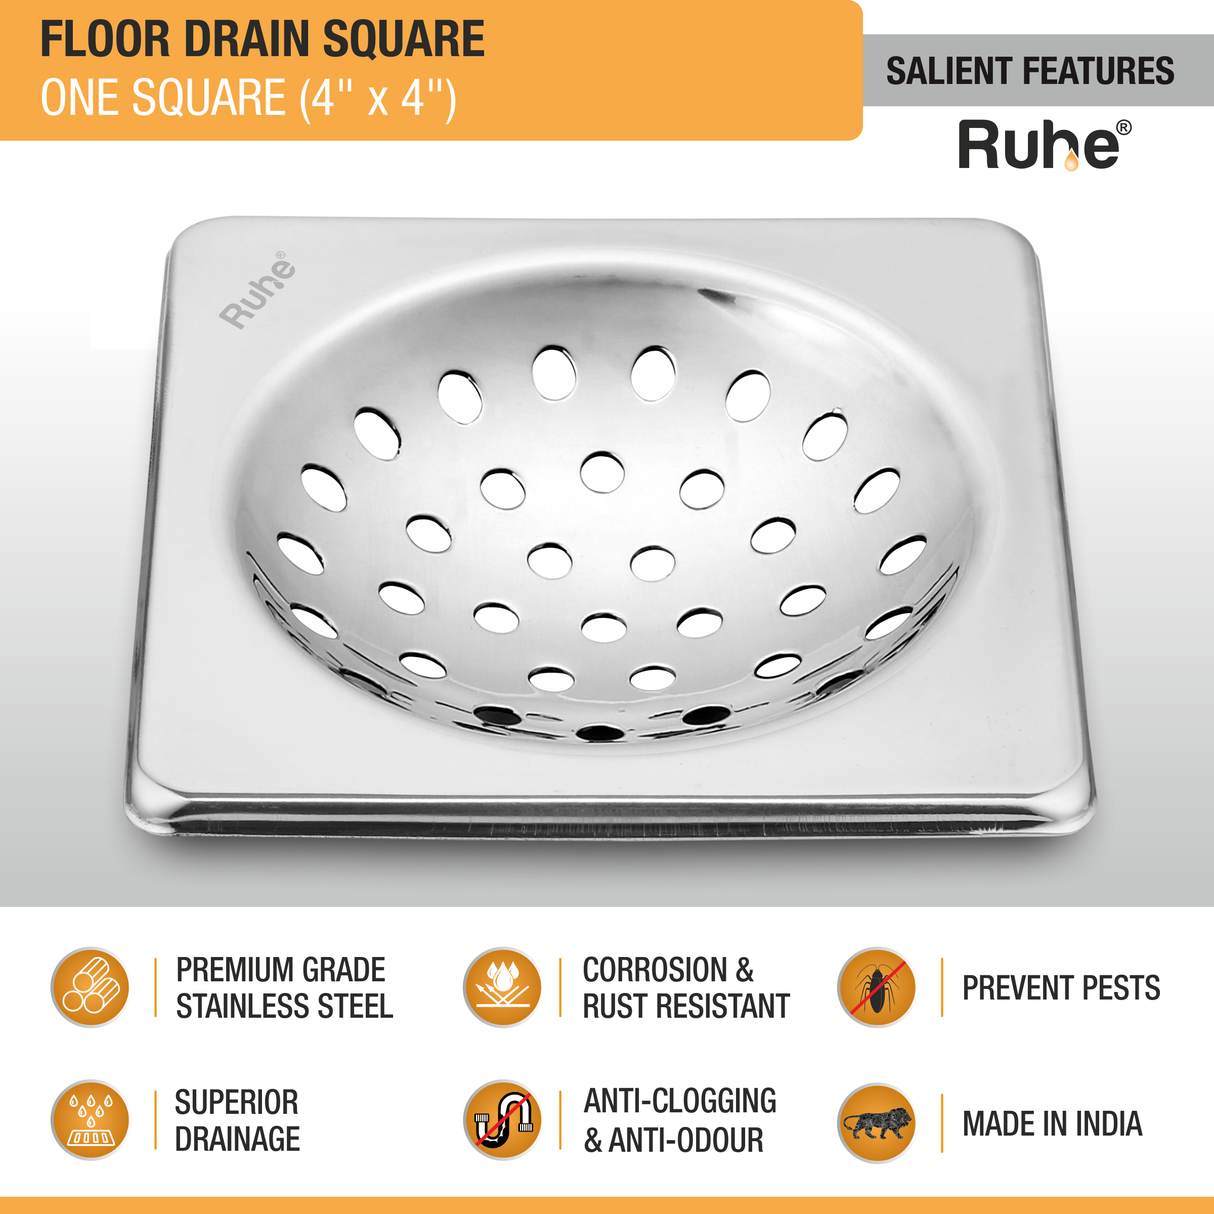 One Square with Collar Floor Drain (4 x 4 inches) (Pack of 2) features